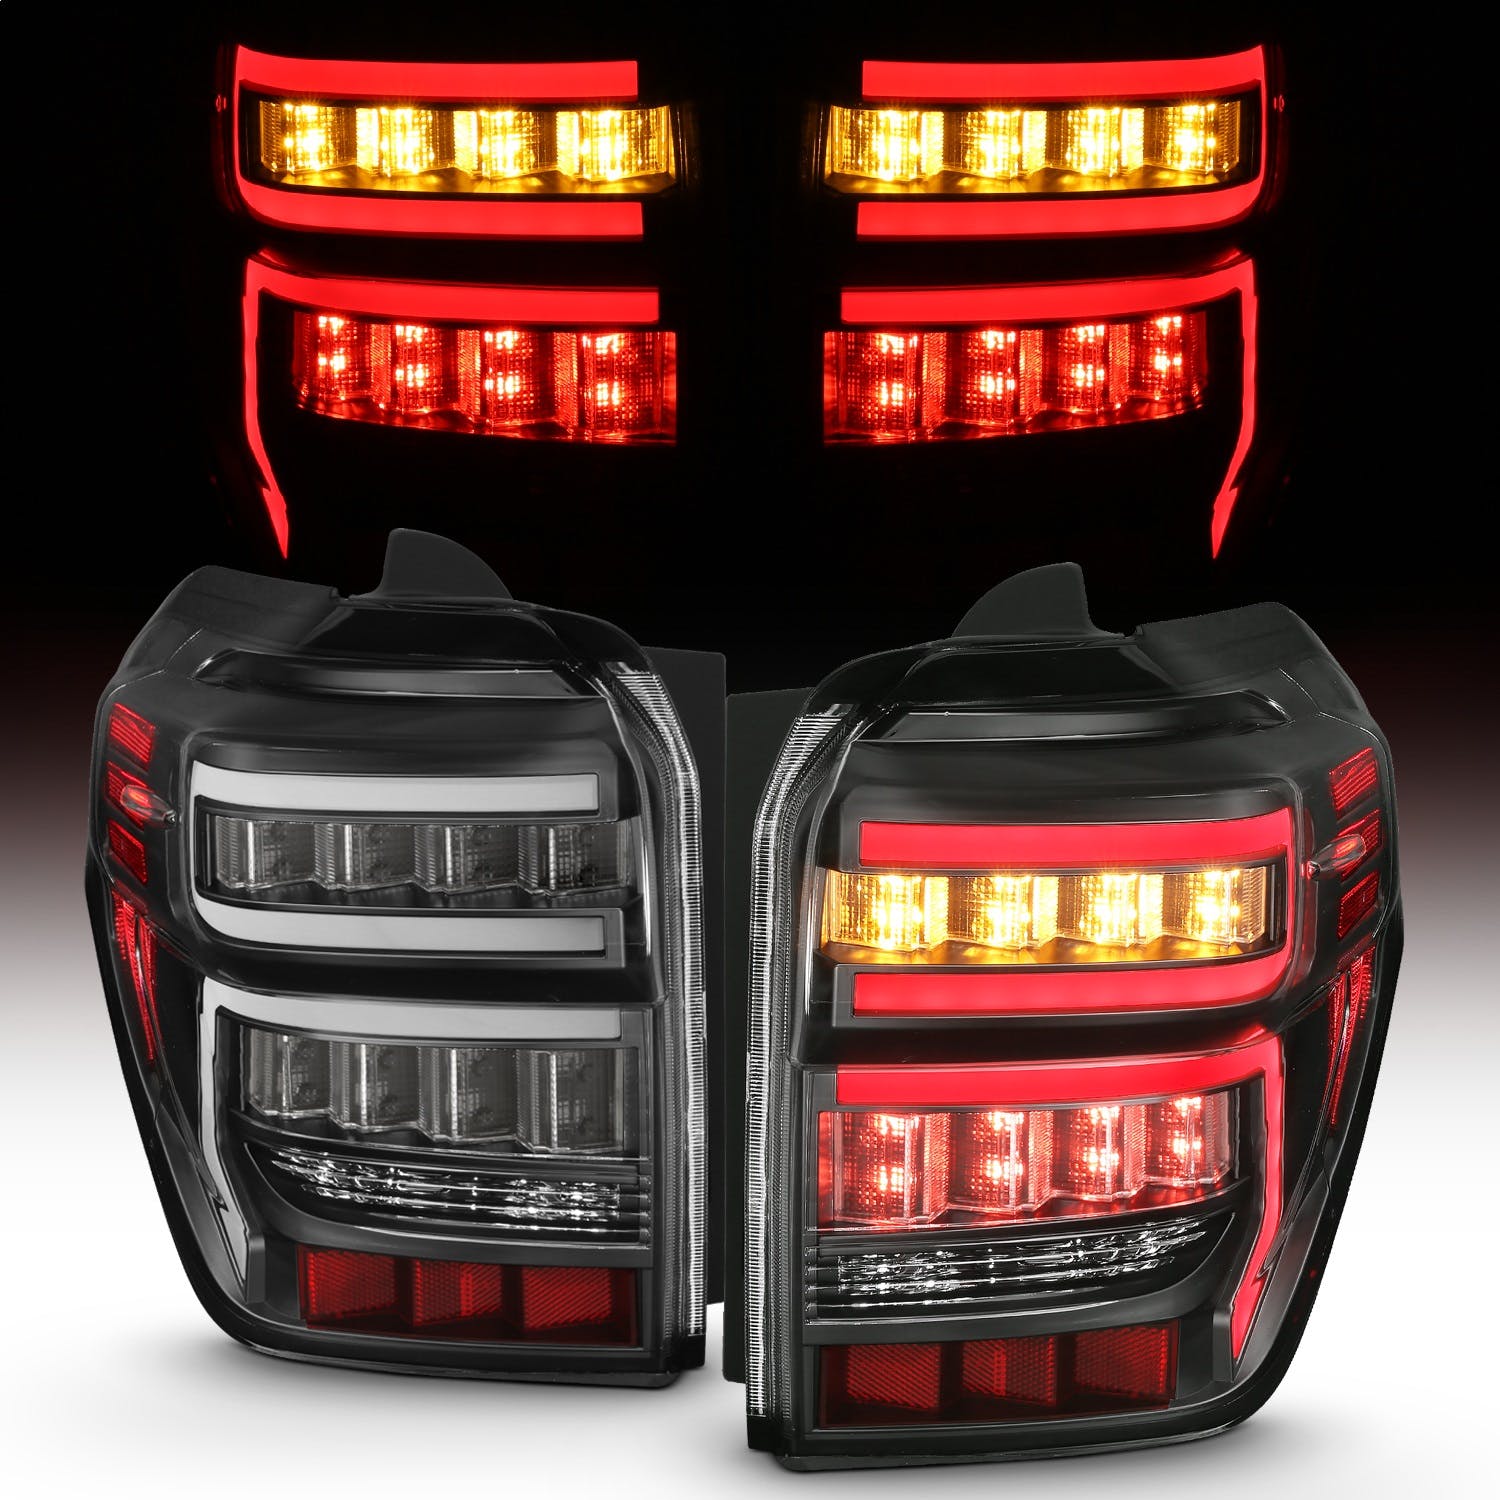 AnzoUSA 311311 Tail Lights Black Housing Clear Lens Red Light Bar With sequential